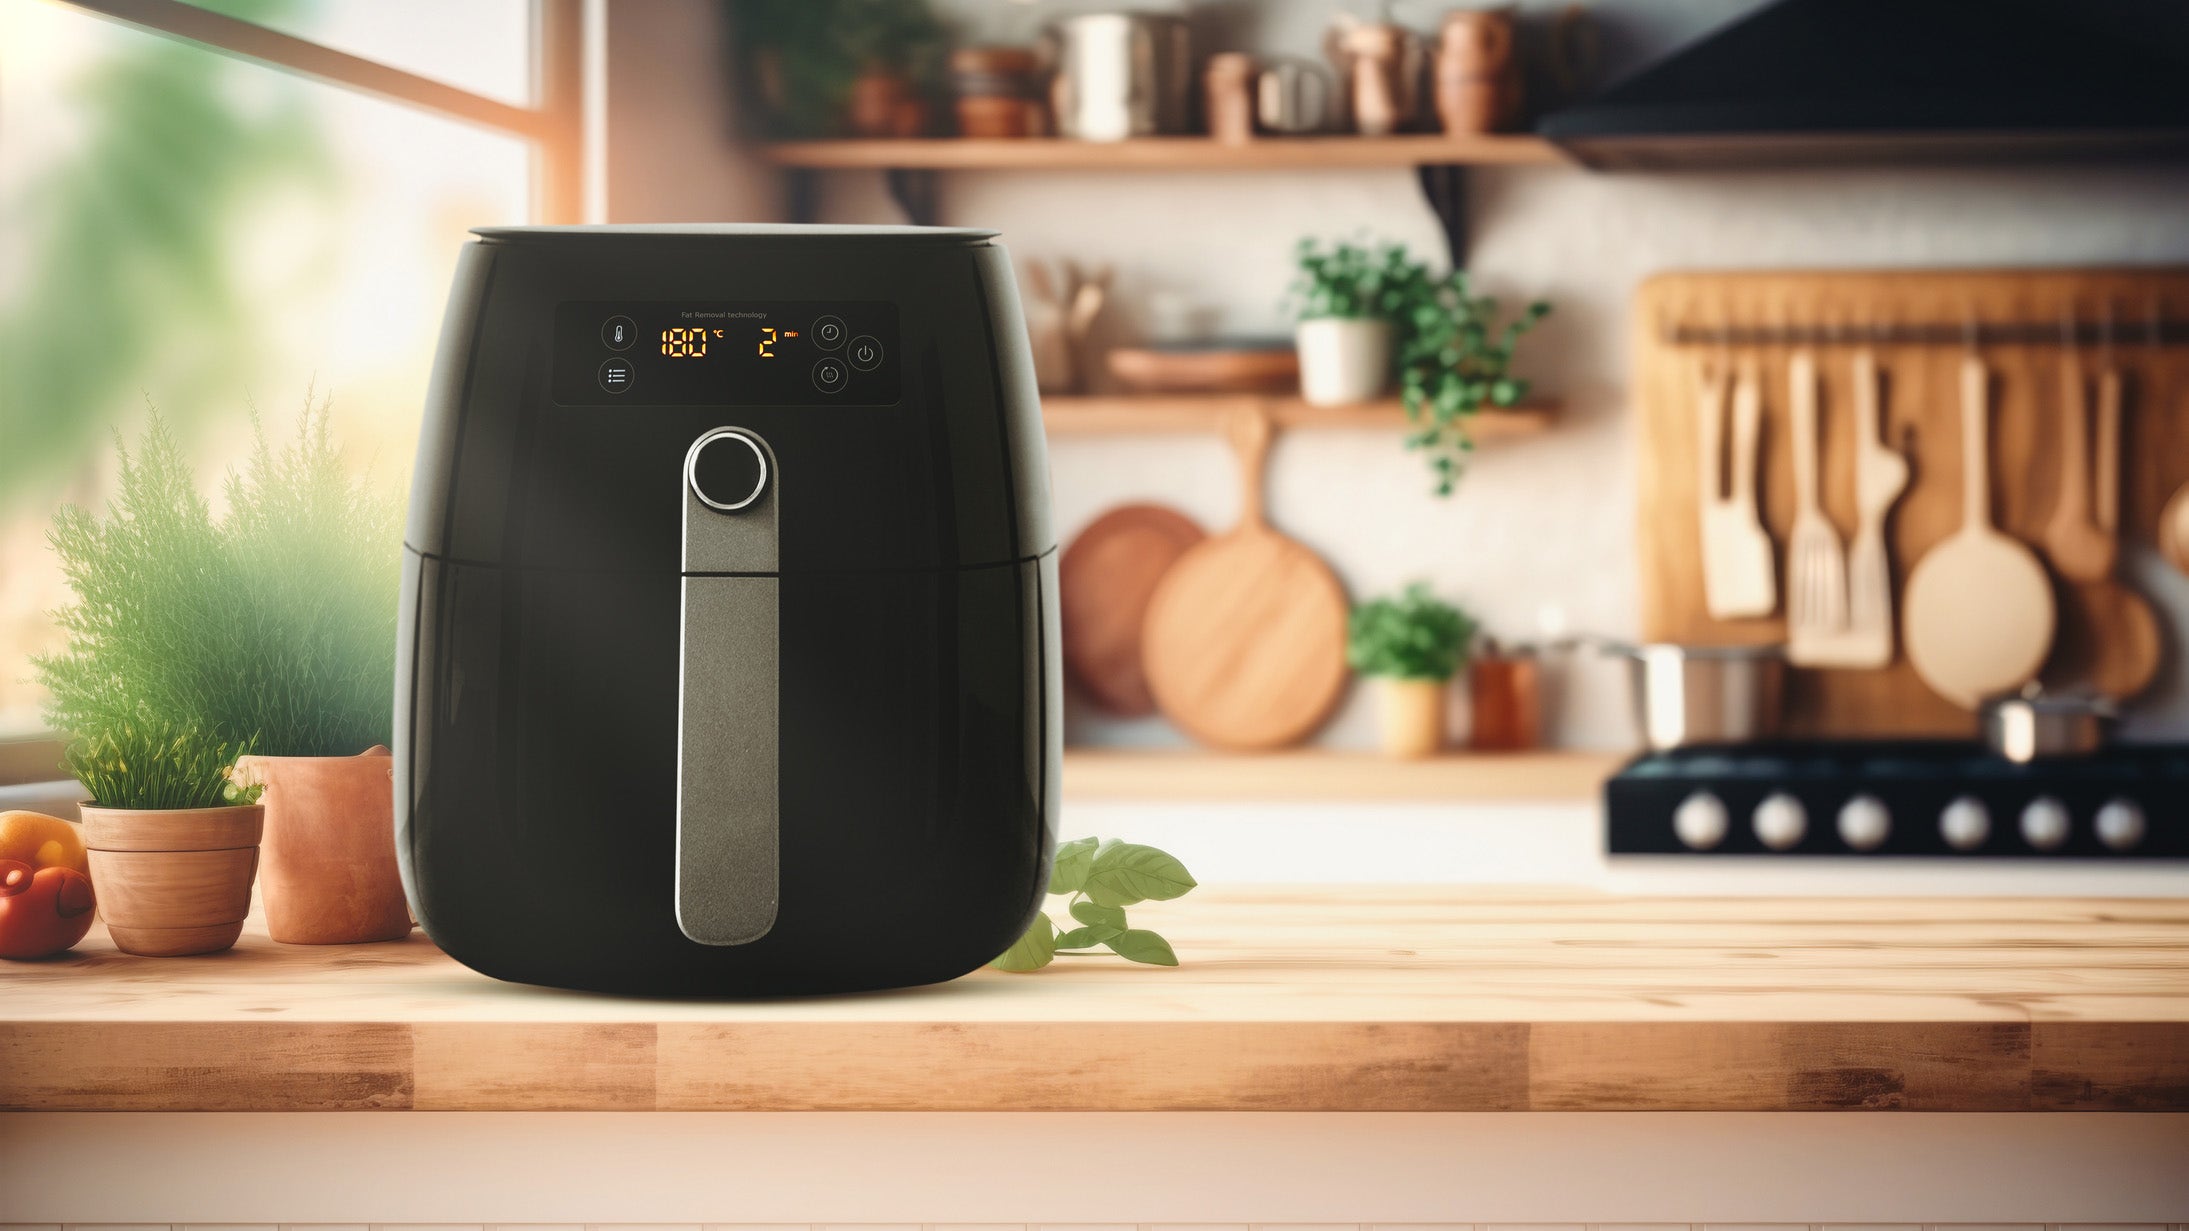 10 kitchen appliances you’ll find on sale at Amazon this Presidents Day